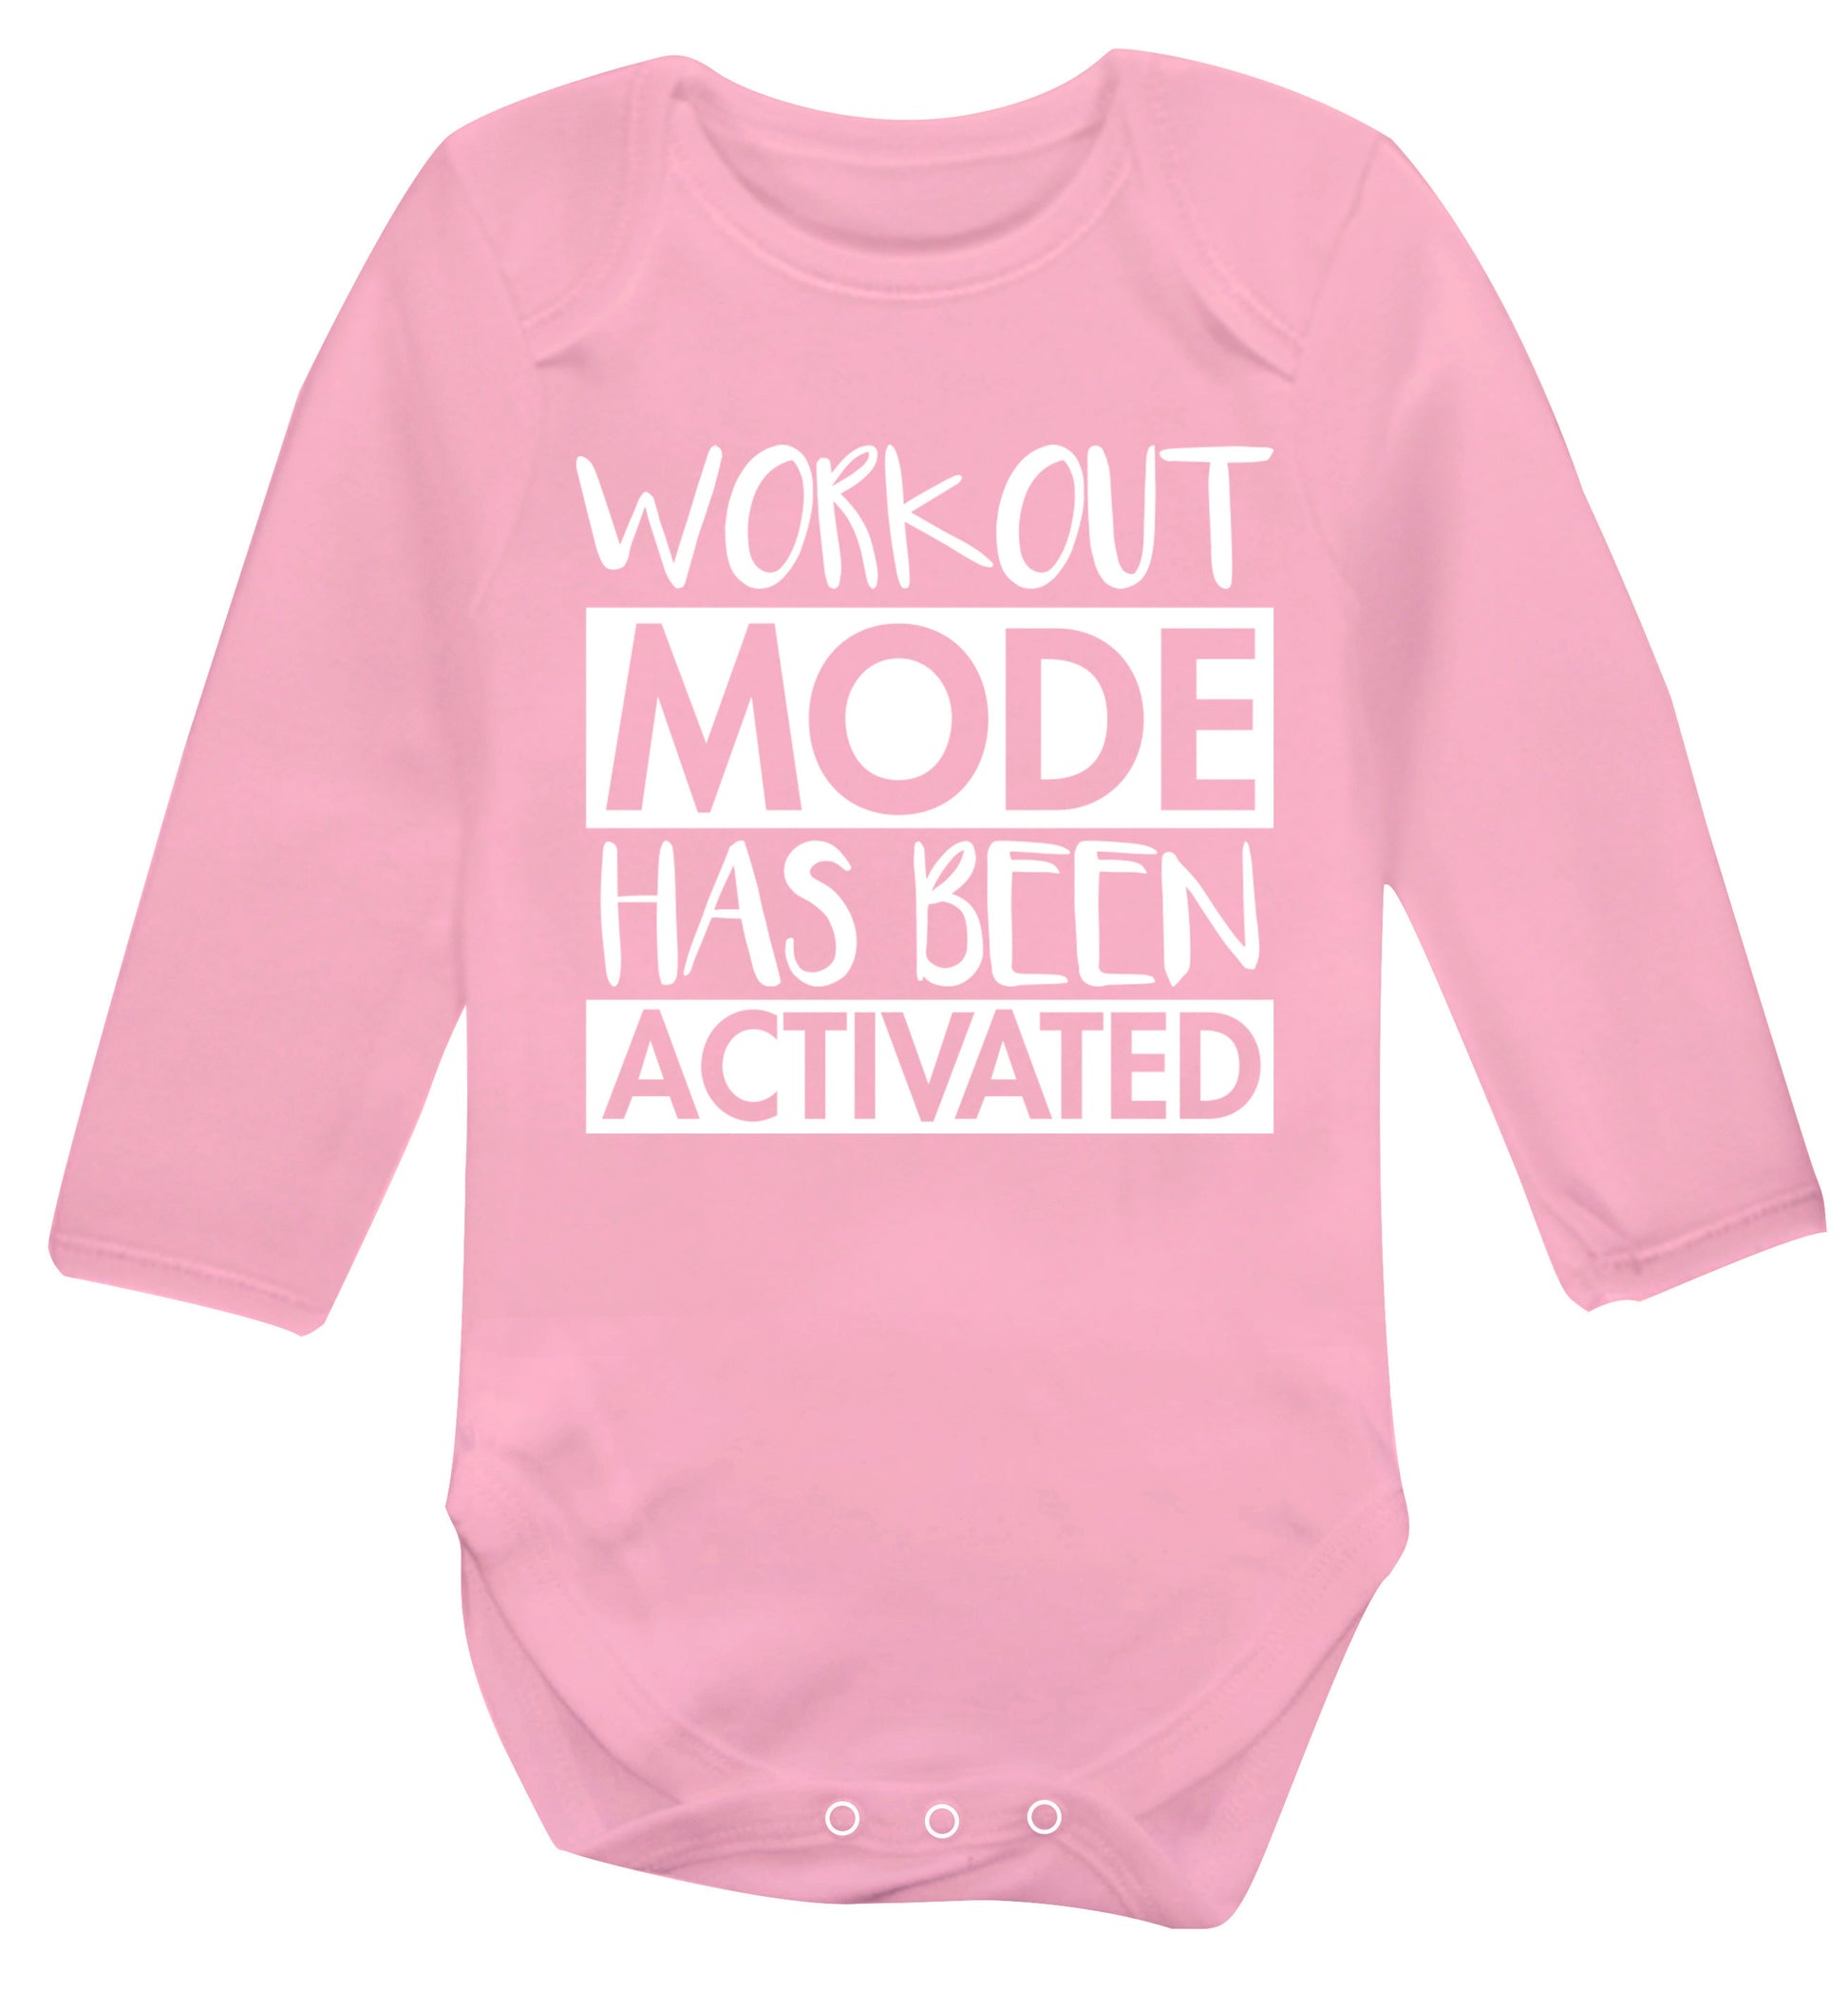 Workout mode has been activated Baby Vest long sleeved pale pink 6-12 months